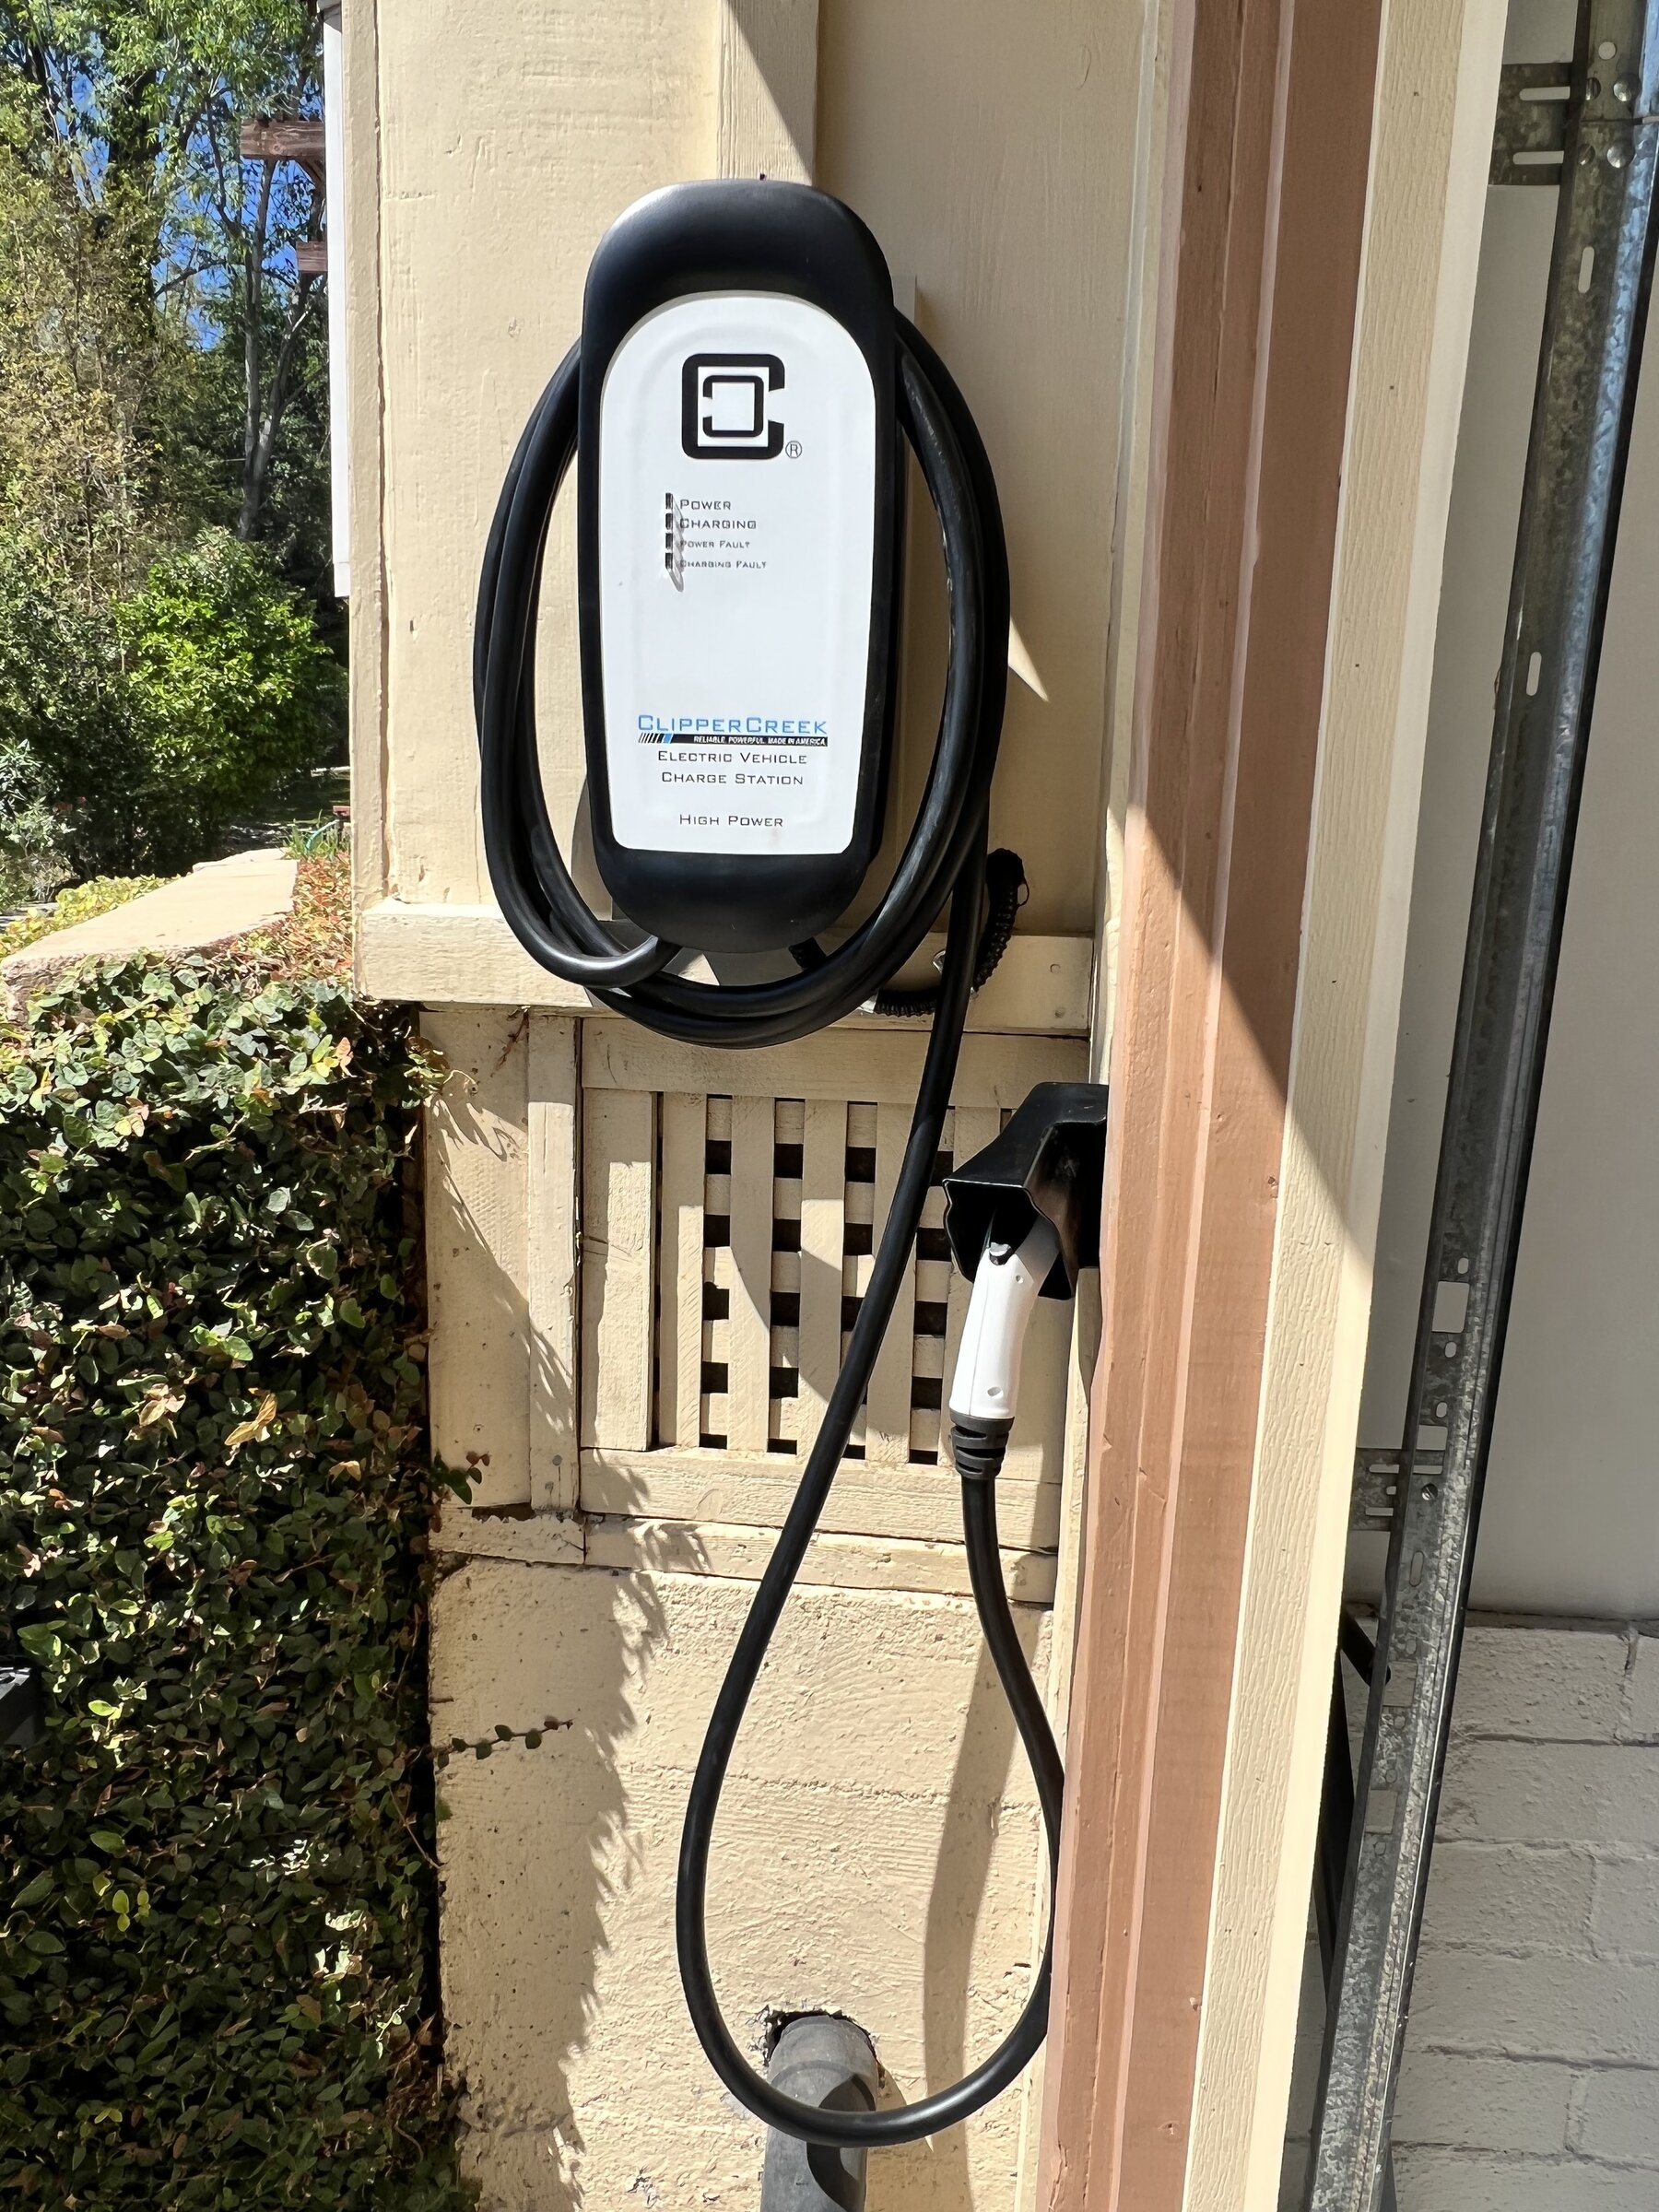 Porsche Taycan Show your home charging setup for your Taycan 3F6A9E03-A34B-4902-83E6-9D7C88F51EB4